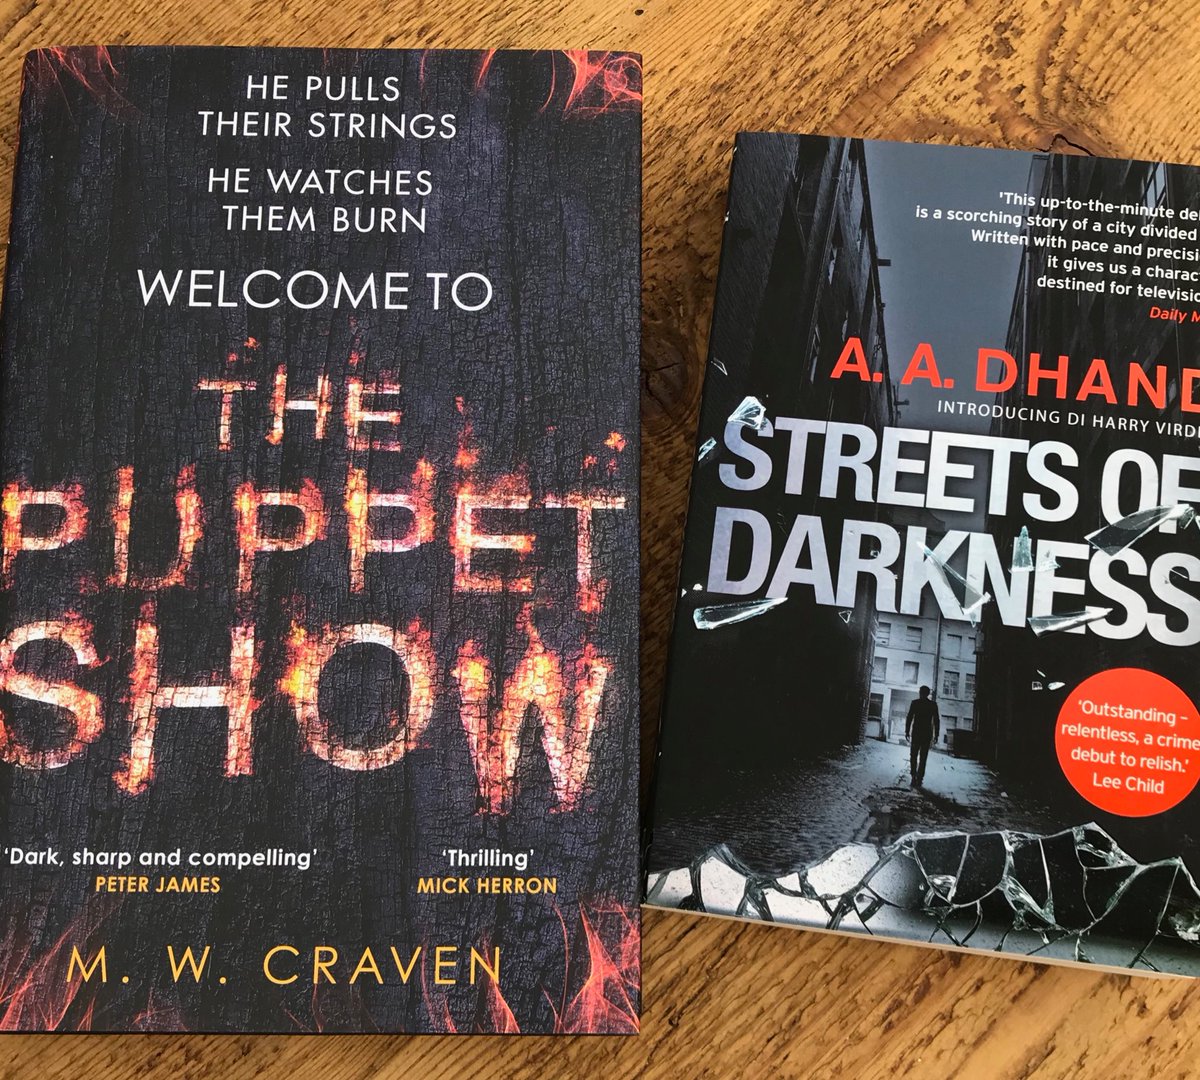 Just back from ⁦@MWCravenUK⁩’s book launch ⁦at @ofsCarlisle⁩ with signed copies of #ThePuppetShow and ⁦@aadhand⁩’s #StreetsOfDarkness to add to my growing collection. Thanks guys. Really enjoyed it. See you at ⁦@TheakstonsCrime⁩.